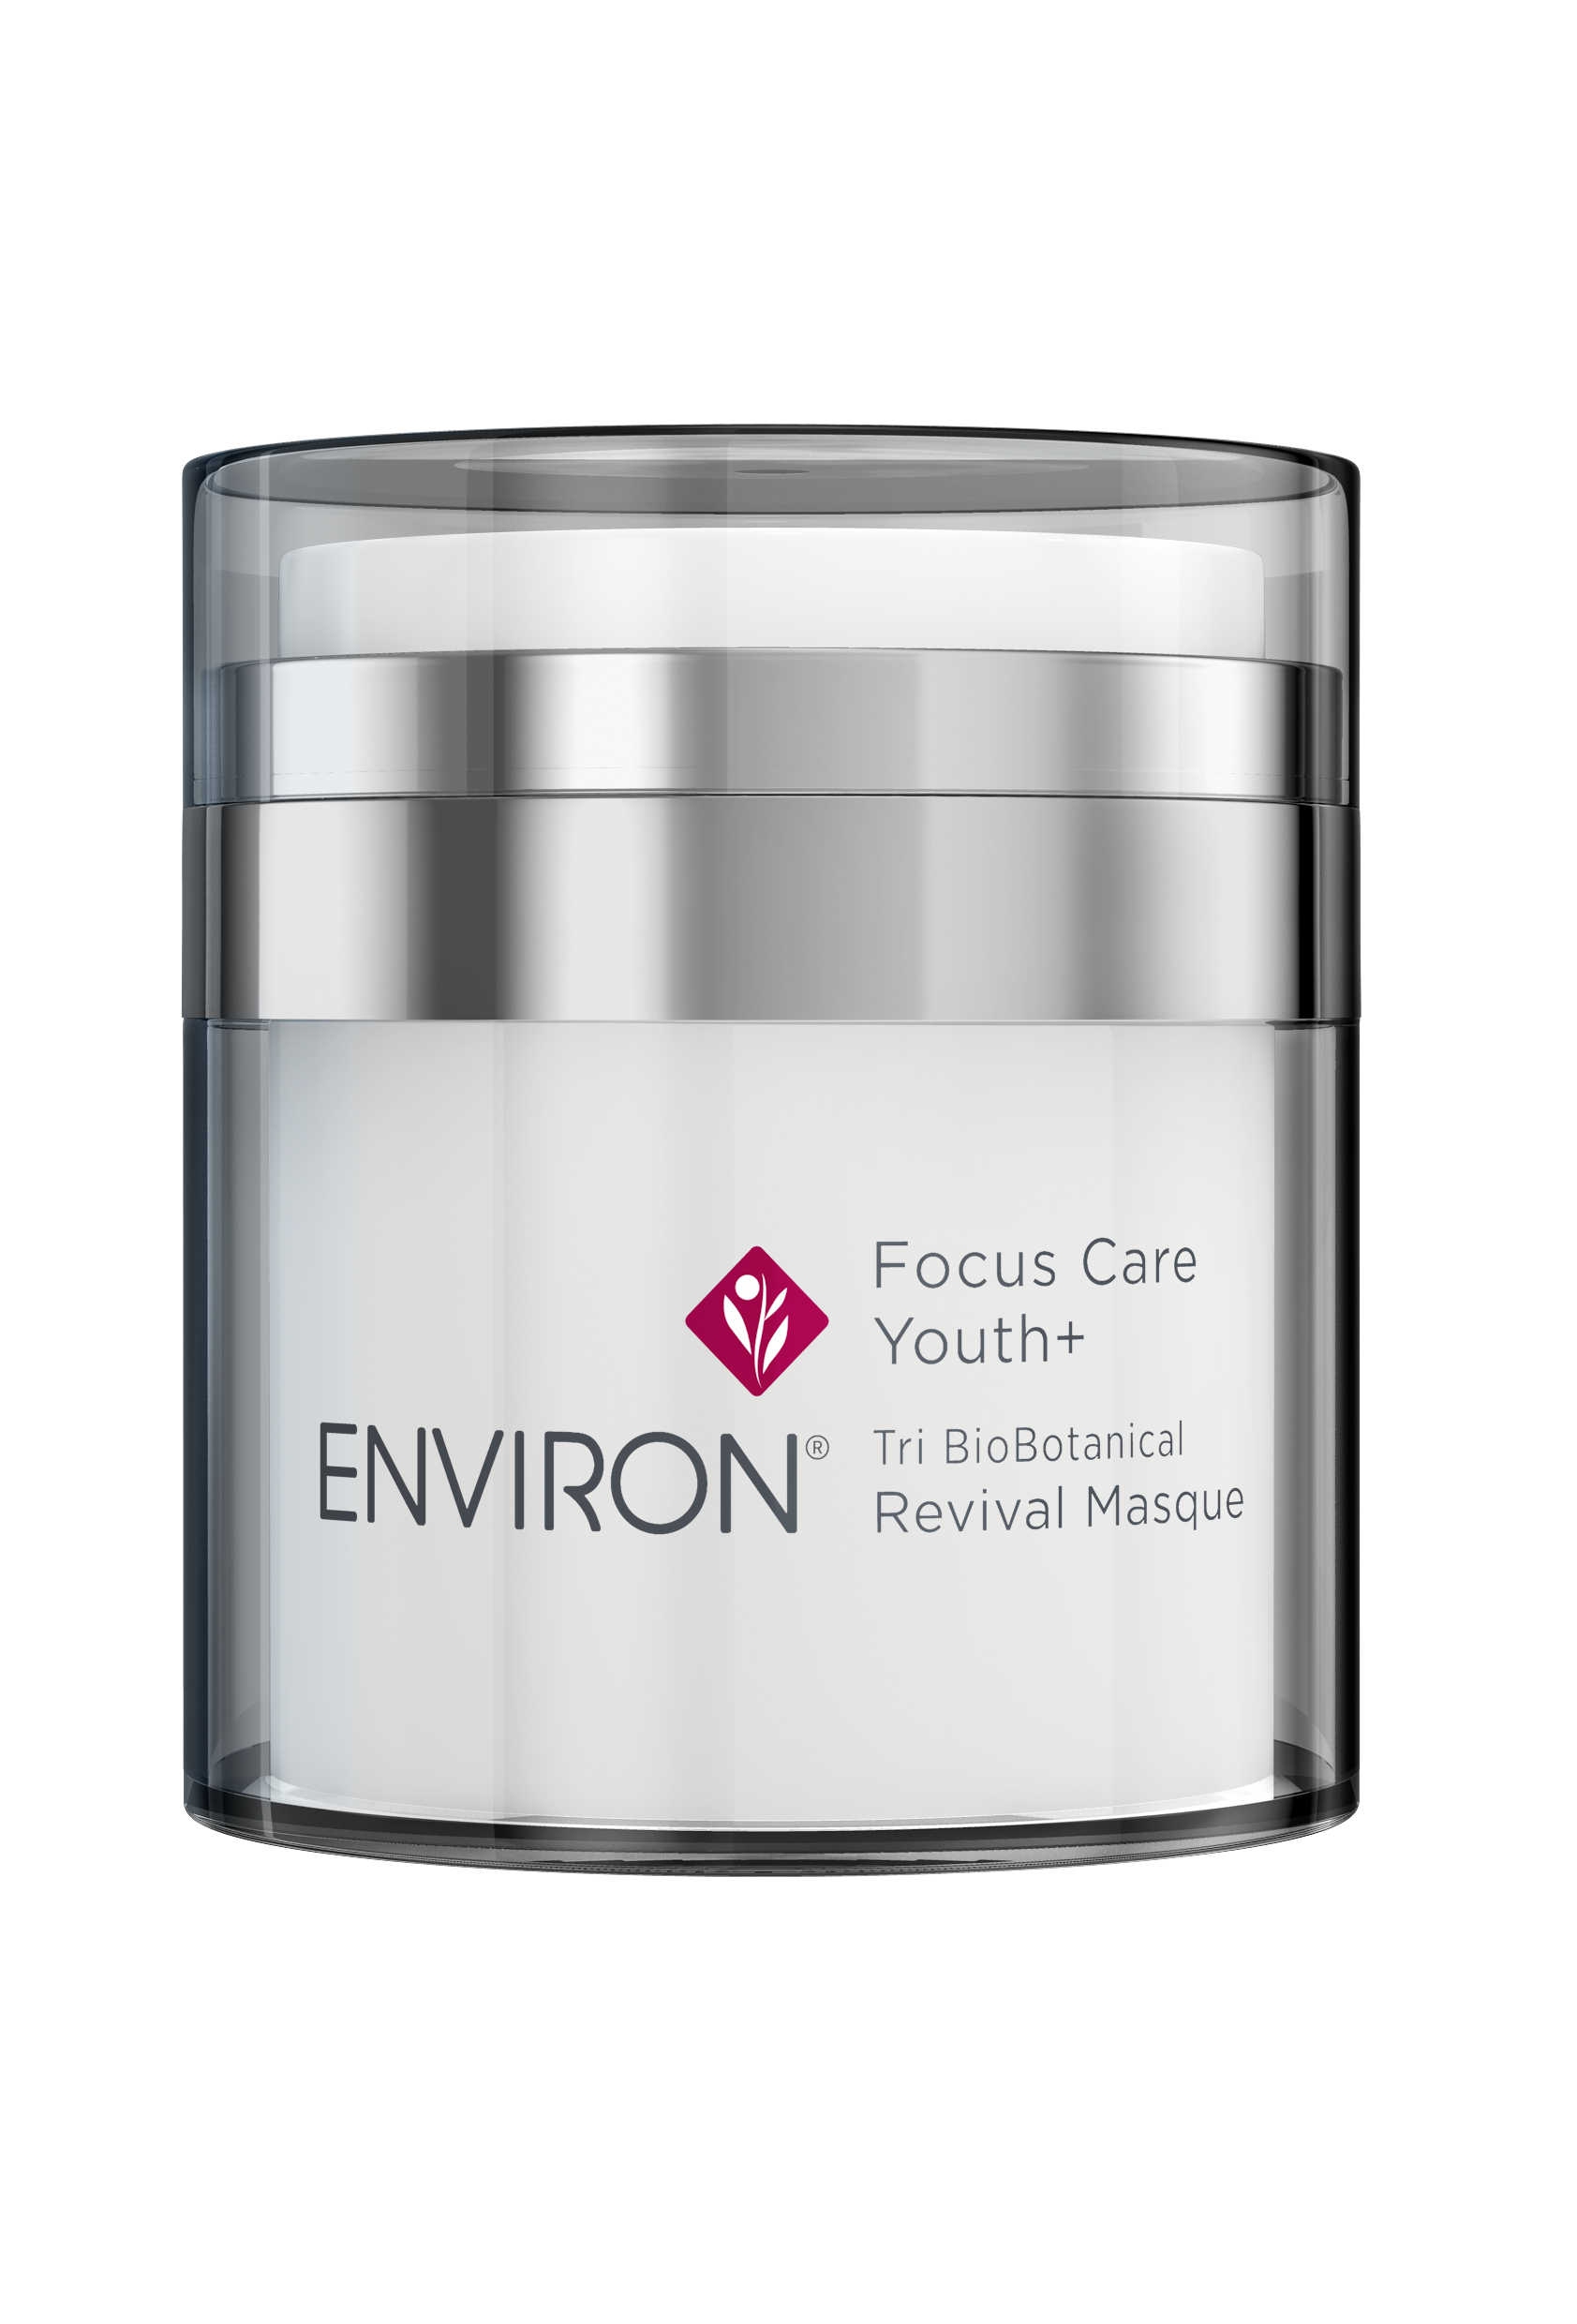 Focus Care Youth+ Revival Masque